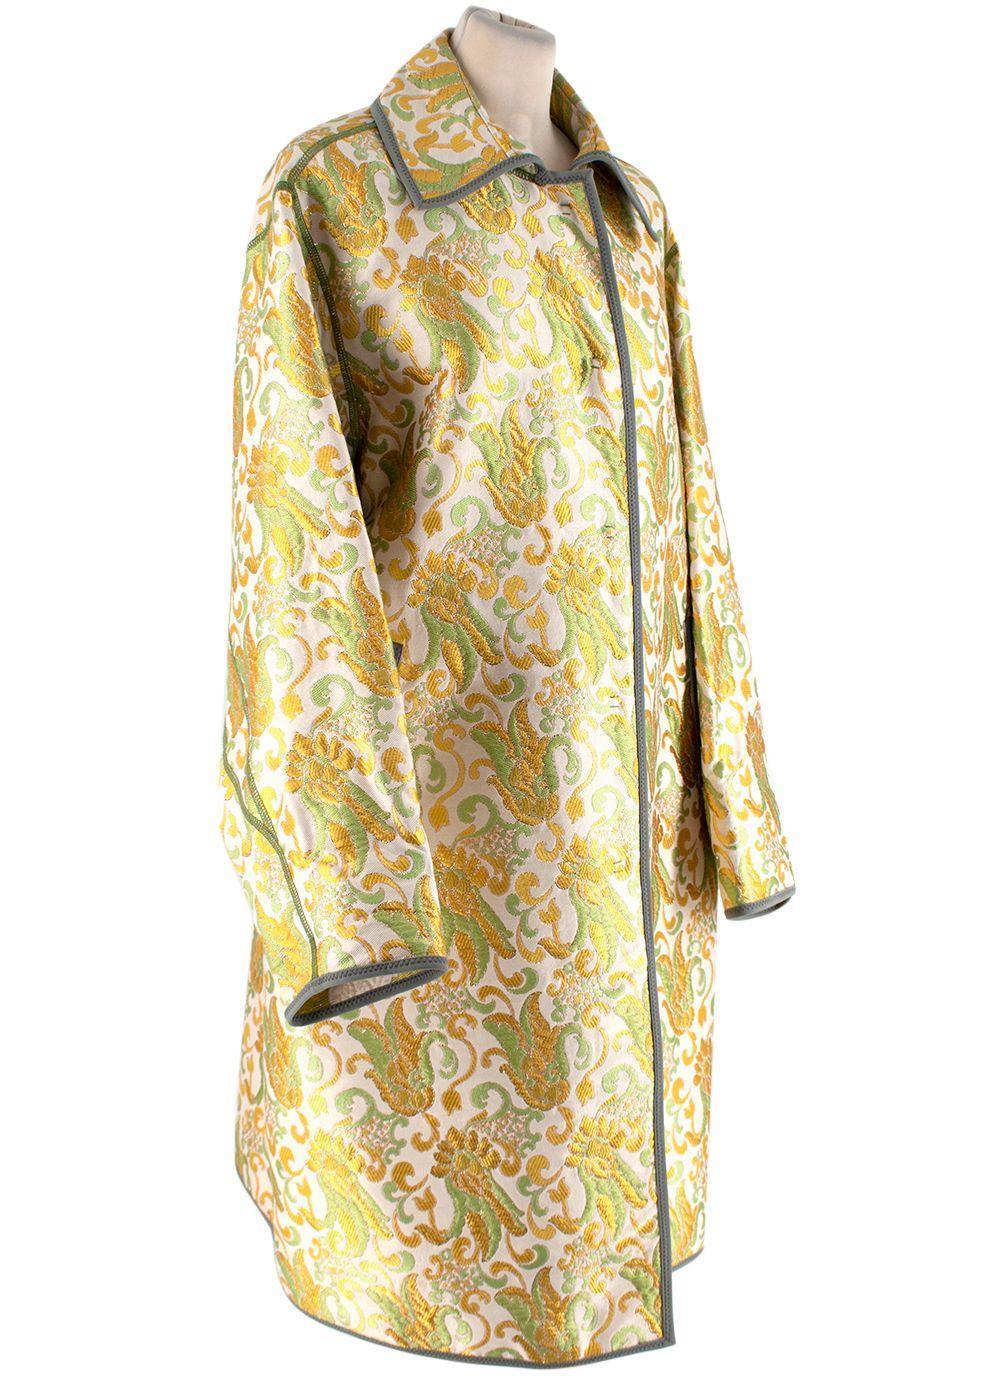 Prada Yellow & Green Damask Jacquard Coat

- Vibrant damask cloth in spring-like yellow and green hues, with a subtle metallic thread running through
- Contrast bound edges
- Classic point collar, concealed popper fastening
- 2 inset hip pockets
-